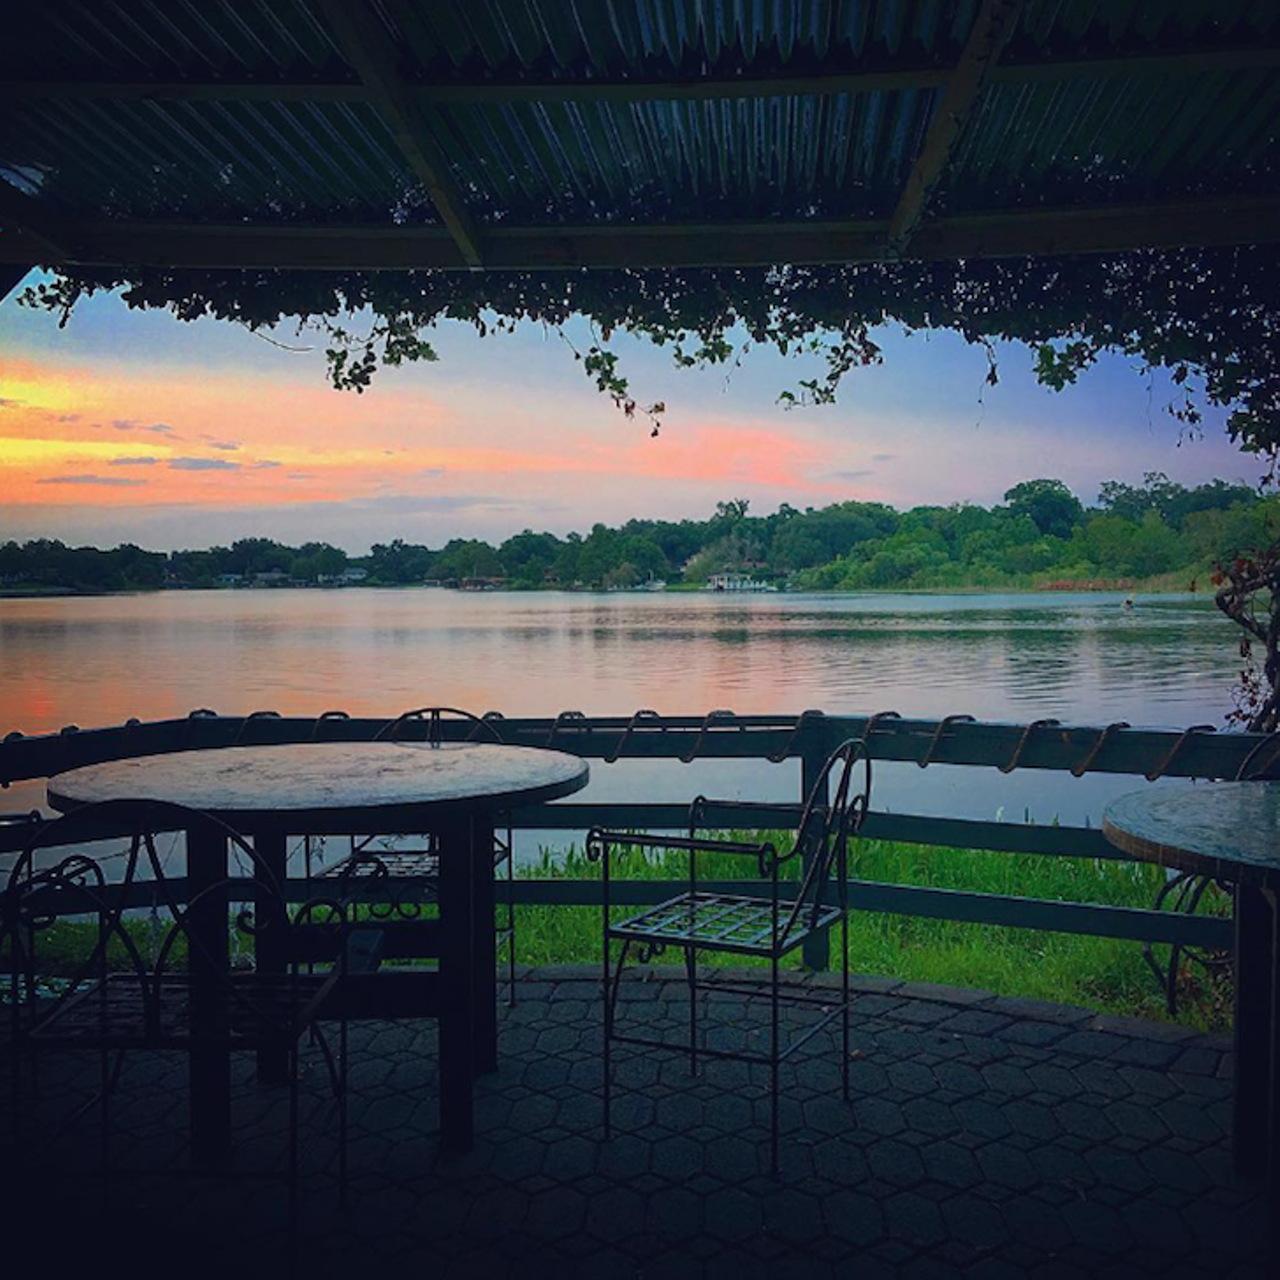 Jullie&#146;s Waterfront
Open 11 a.m.- 10 p.m.; 4201 S Orange Ave, Orlando
Enjoy lakefront views in a more casual environment that has that Old Florida feel to it. Julie&#146;s waterfront deck offers stunning views of Lake Jennie Jewel, no reservations required.  
Photo via hayheather17/Instagram